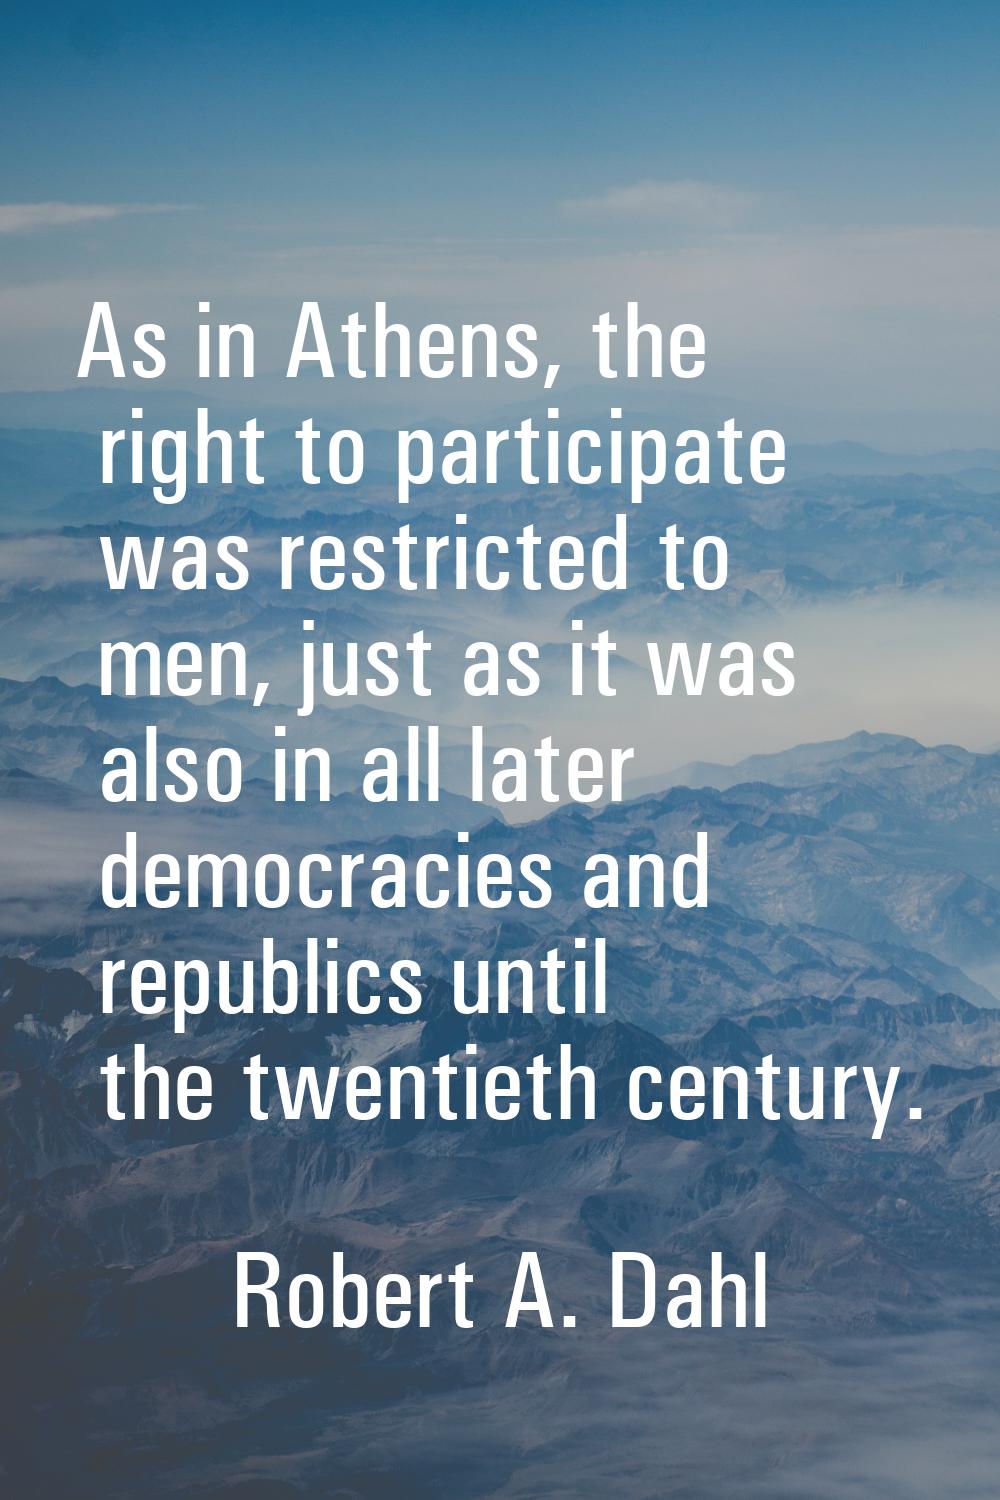 As in Athens, the right to participate was restricted to men, just as it was also in all later demo